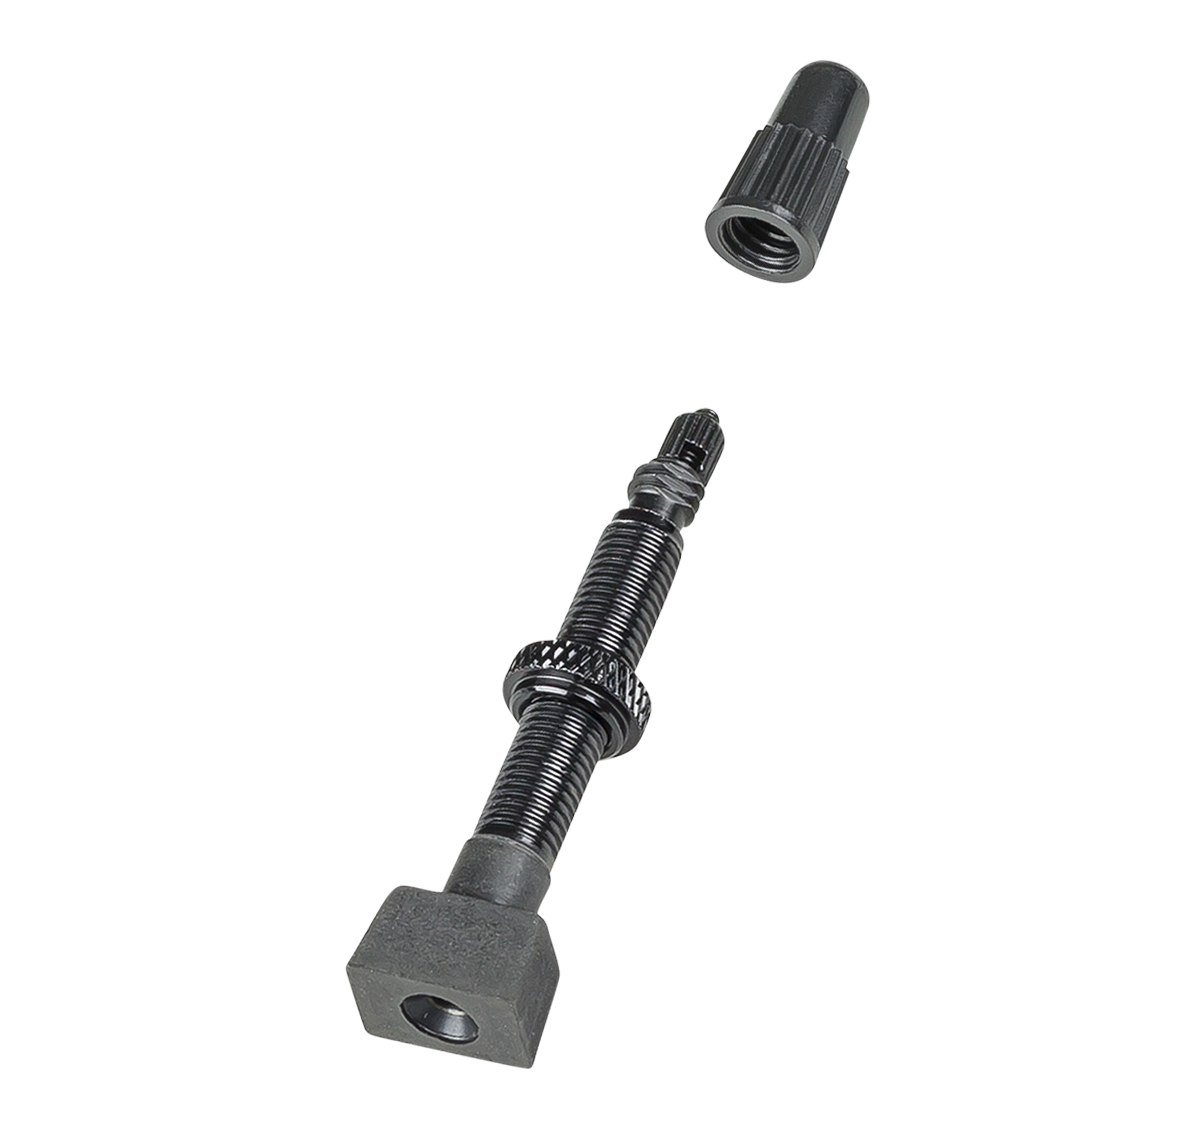 Valve Core Wrench Cap and Mountain Bikes Road LEZYNE CNC TLR Bicycle Valve CNC Aluminum Stem Nut Designed for Tubeless Tires Tubeless Tire Valve Stem for Gravel